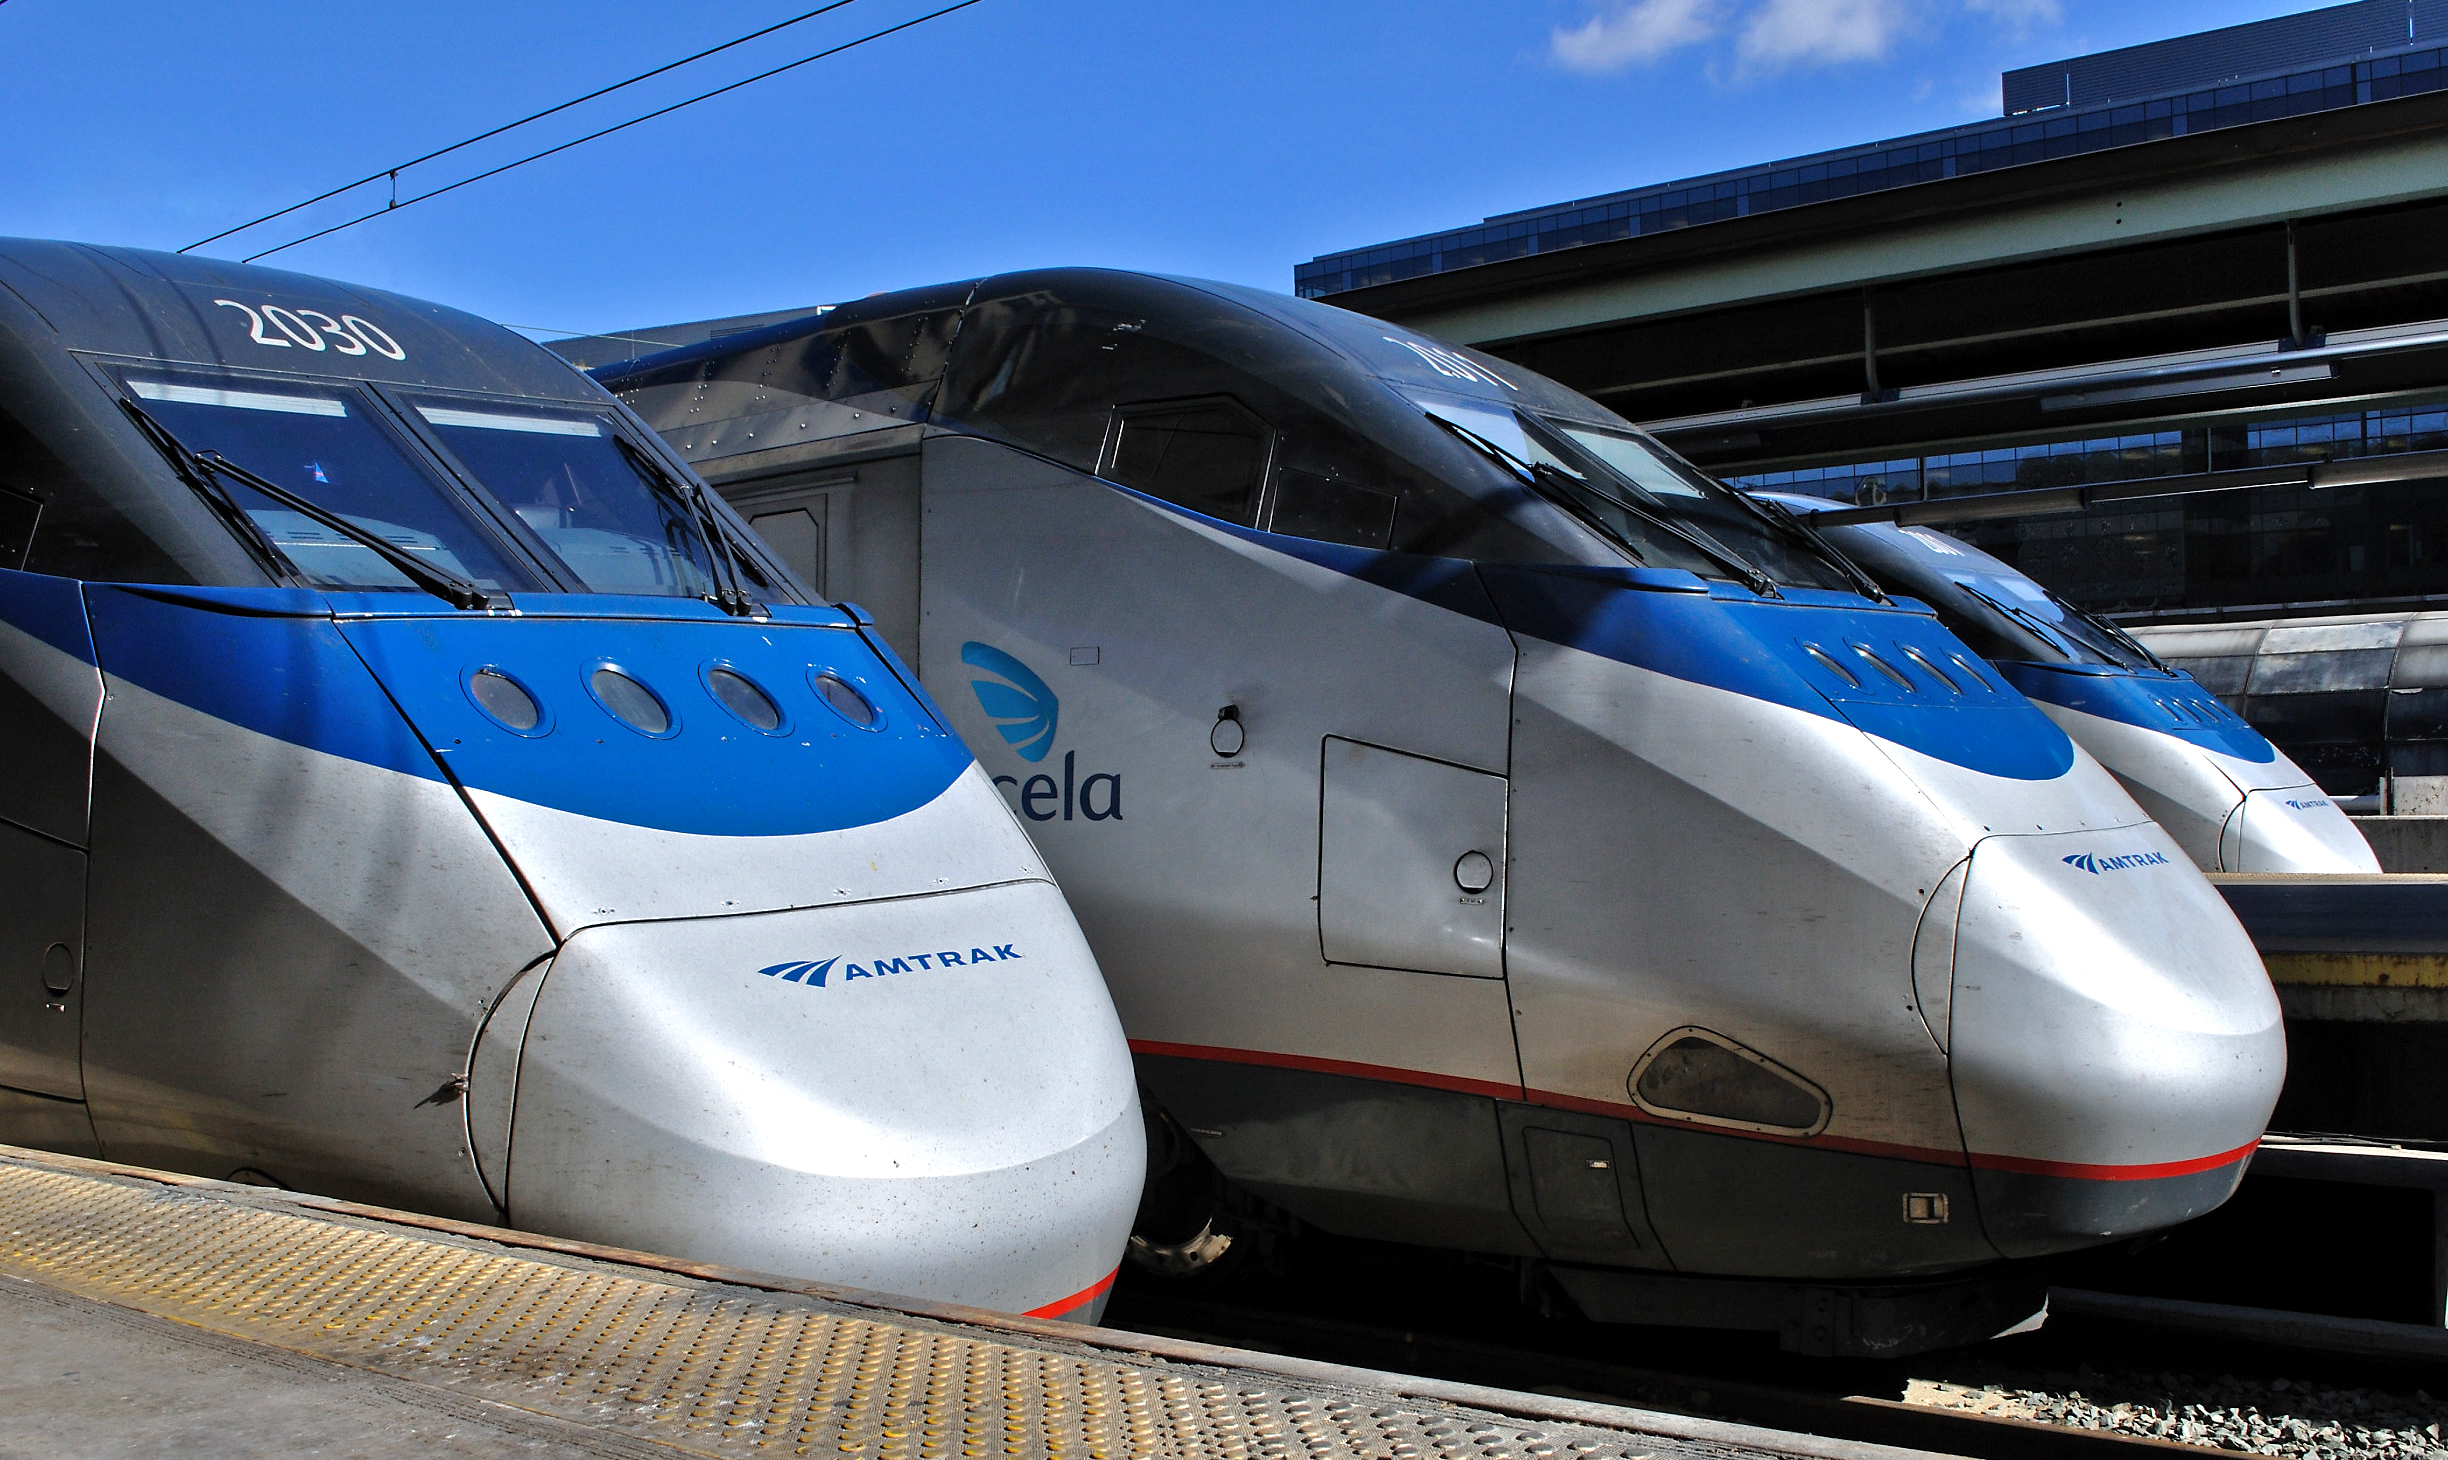 How Time Flies, 15 Years of Acela Express